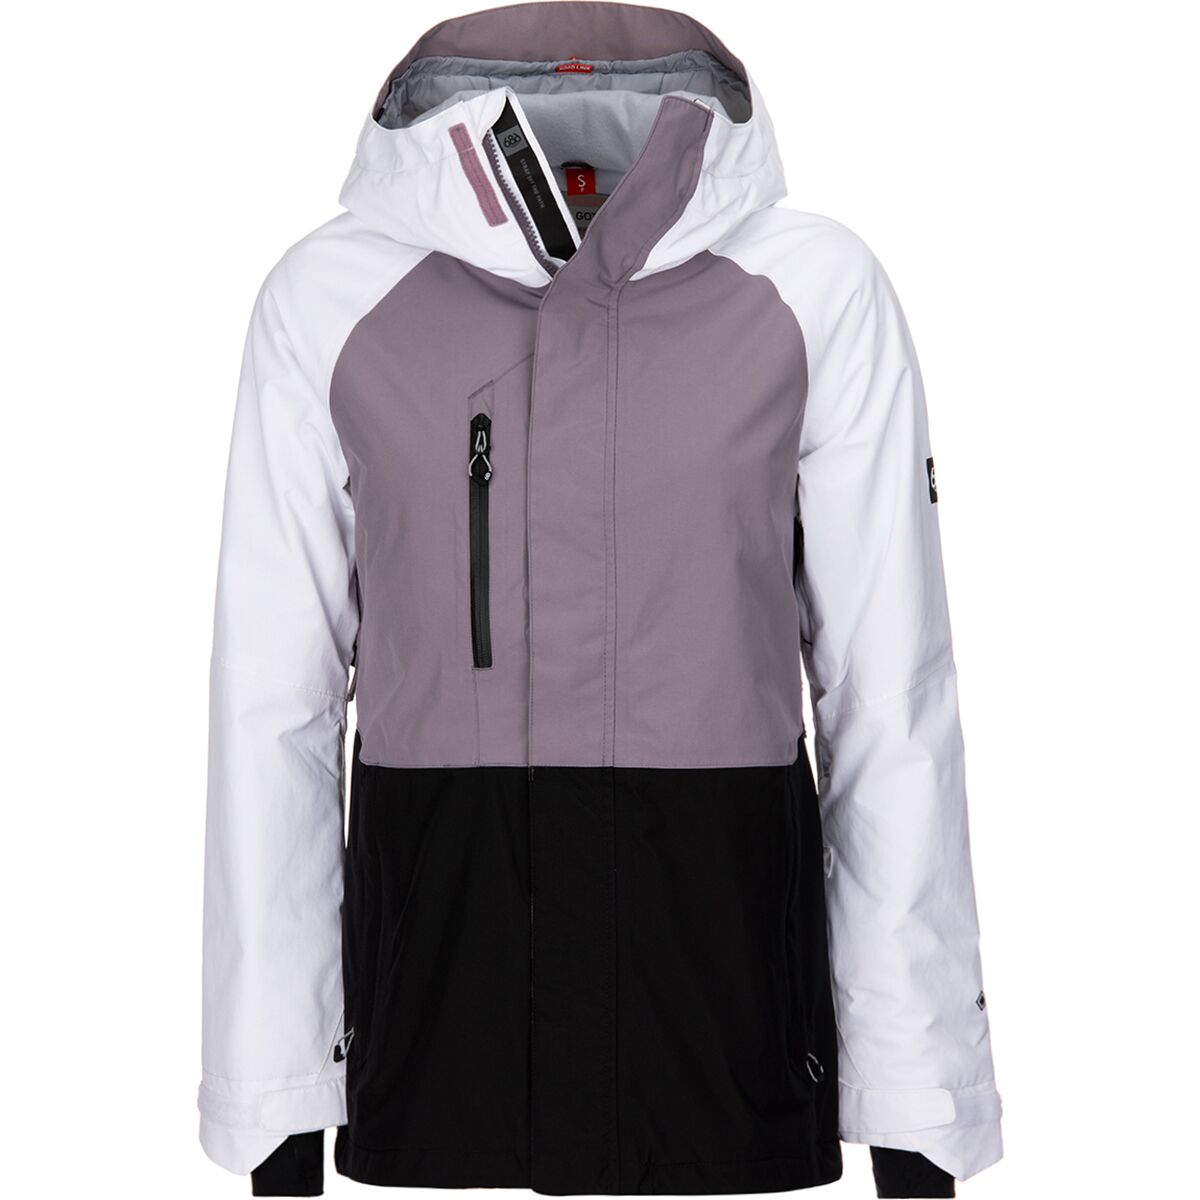 686 Willow GORE-TEX Insulated Jacket - Women's White Colorblock